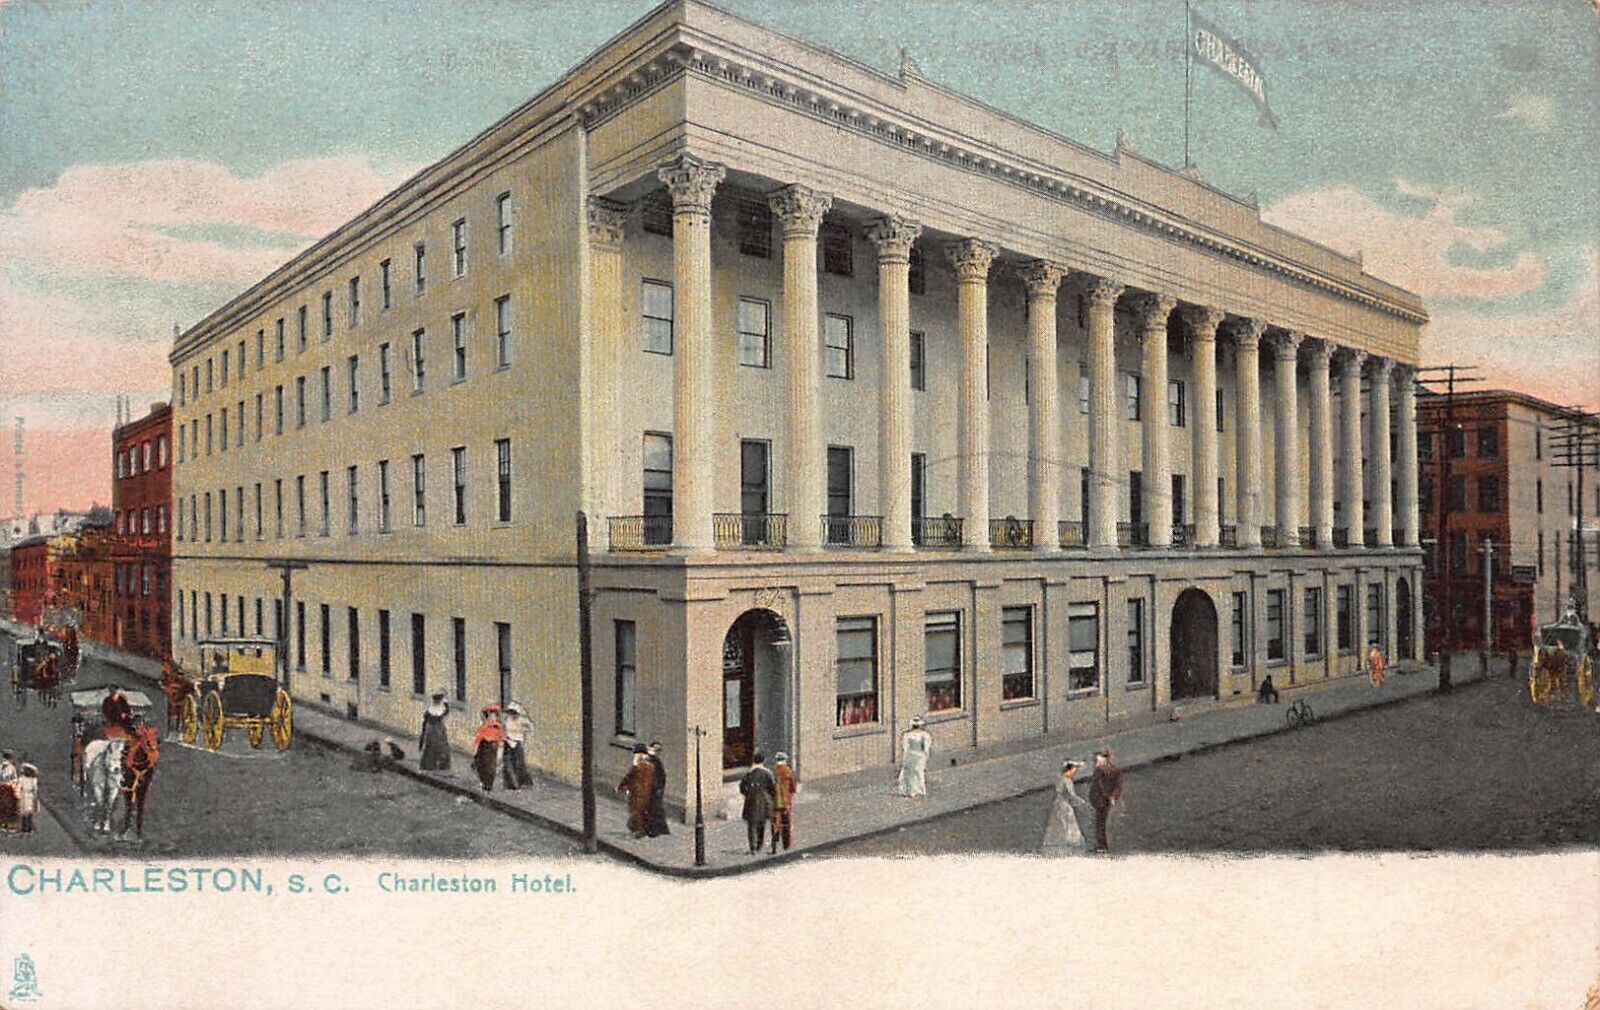 Charleston Hotel, Charleston, S.C., Early Postcard, Published by Tuck & Sons